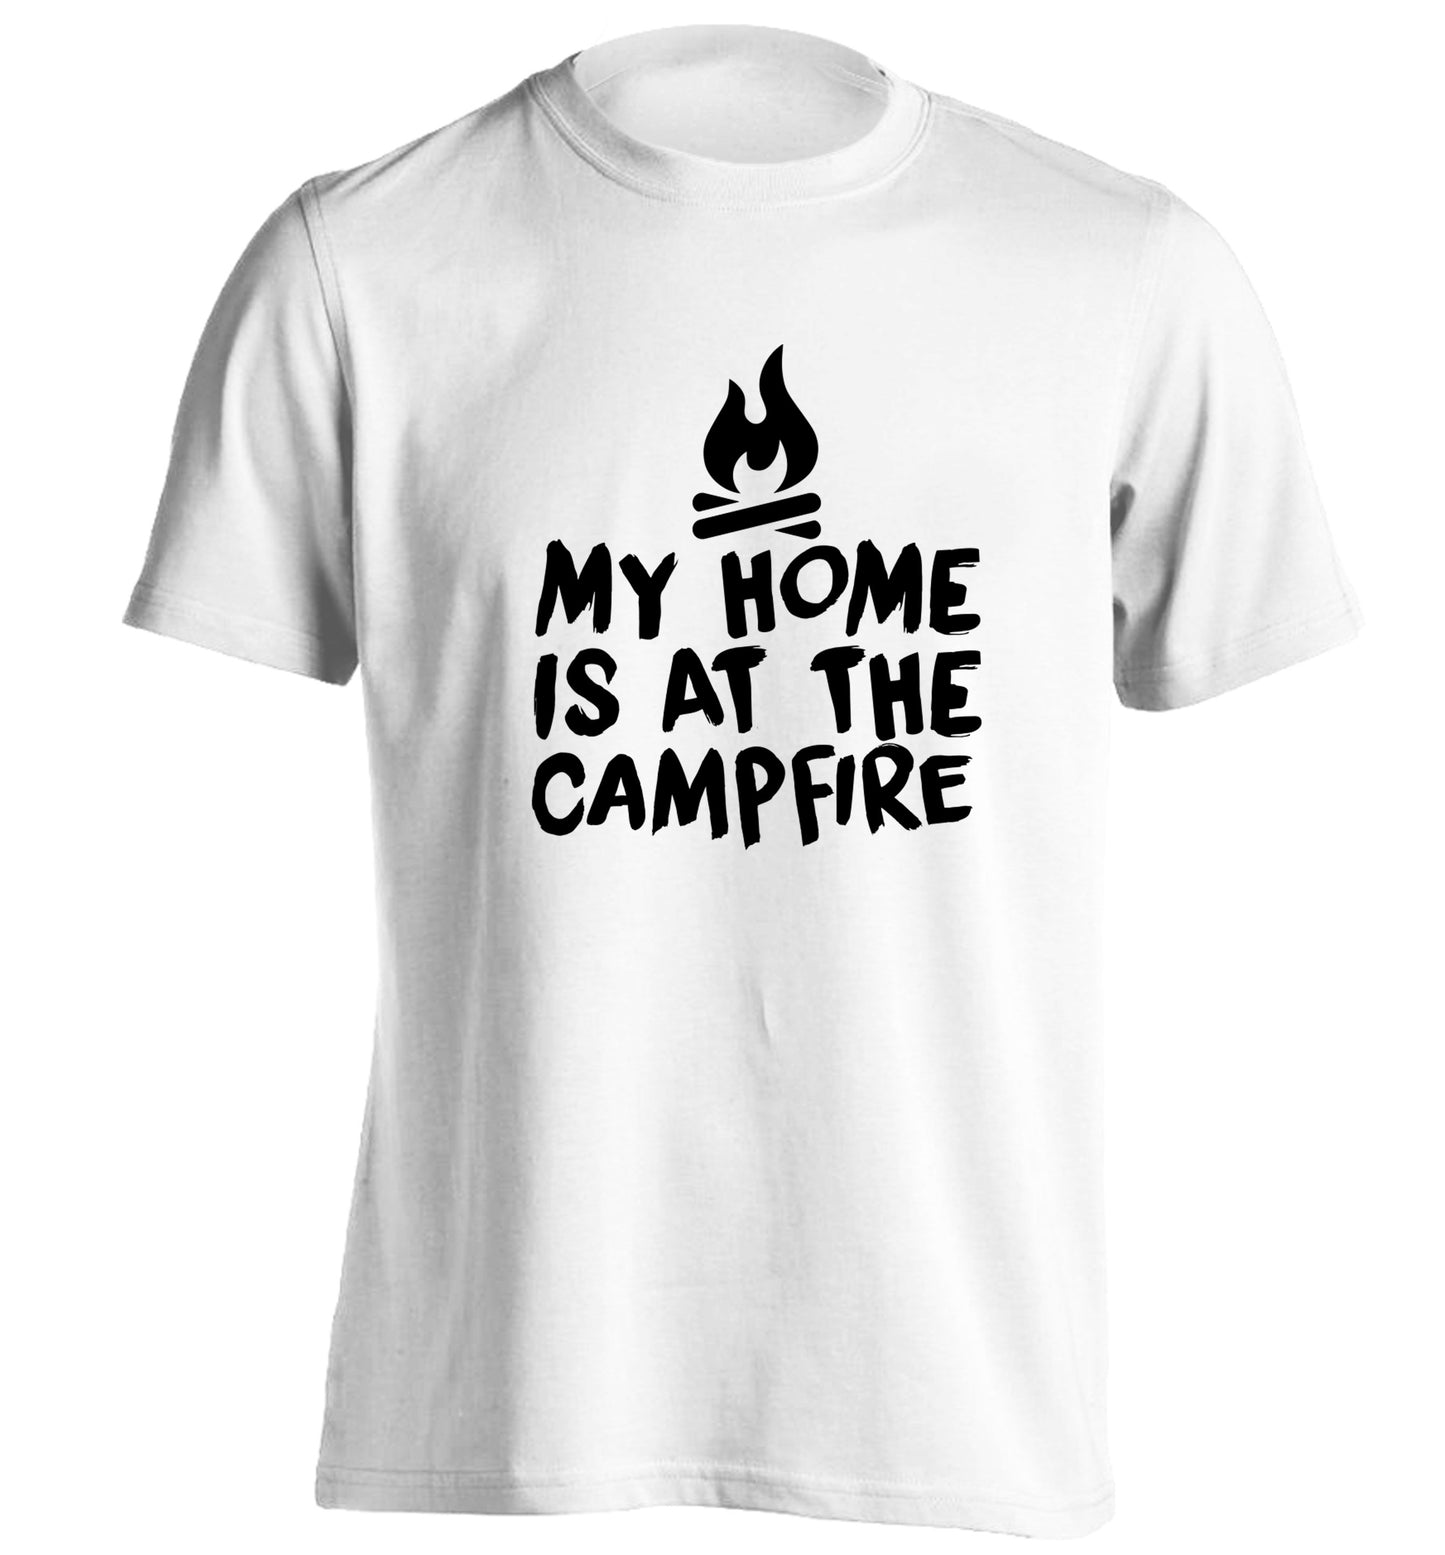 My home is at the campfire adults unisex white Tshirt 2XL